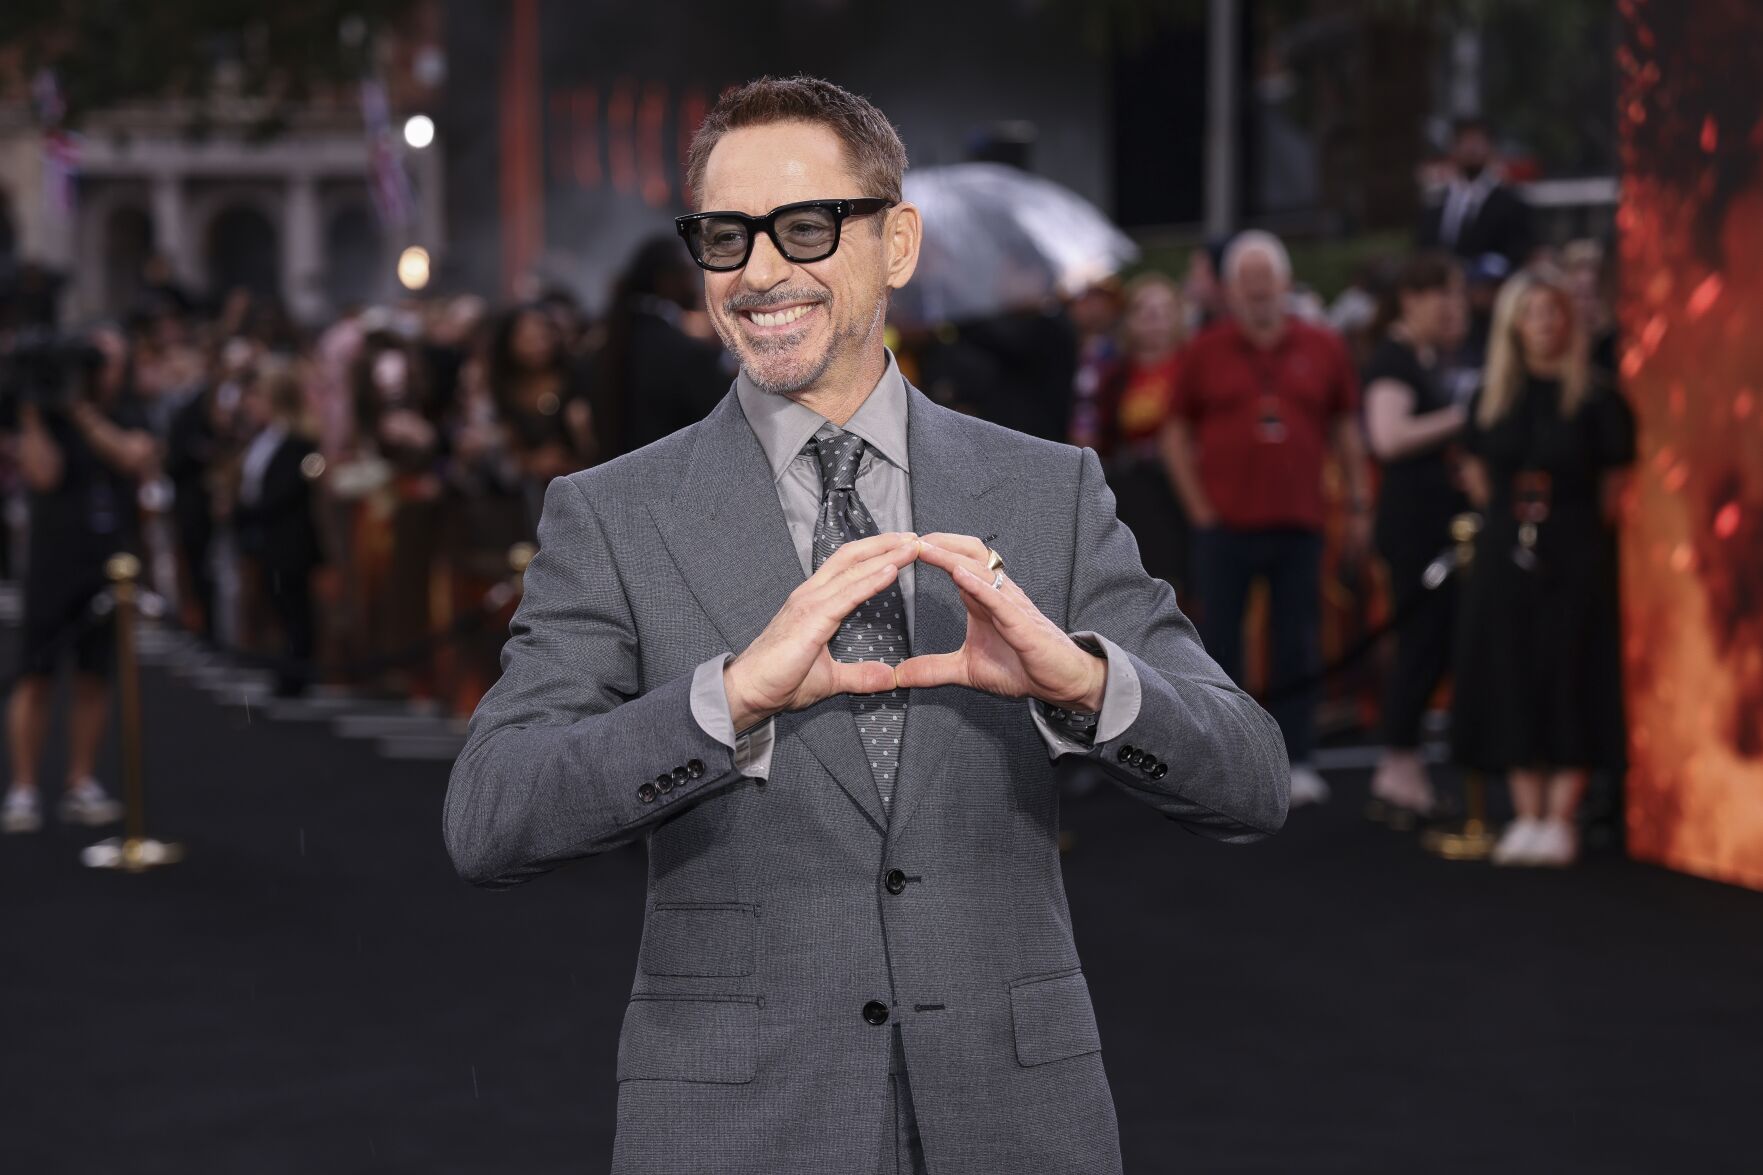 Robert Downey Jr. at the UK Premiere of "Oppenheimer" on July 13, 2023 in London, England.